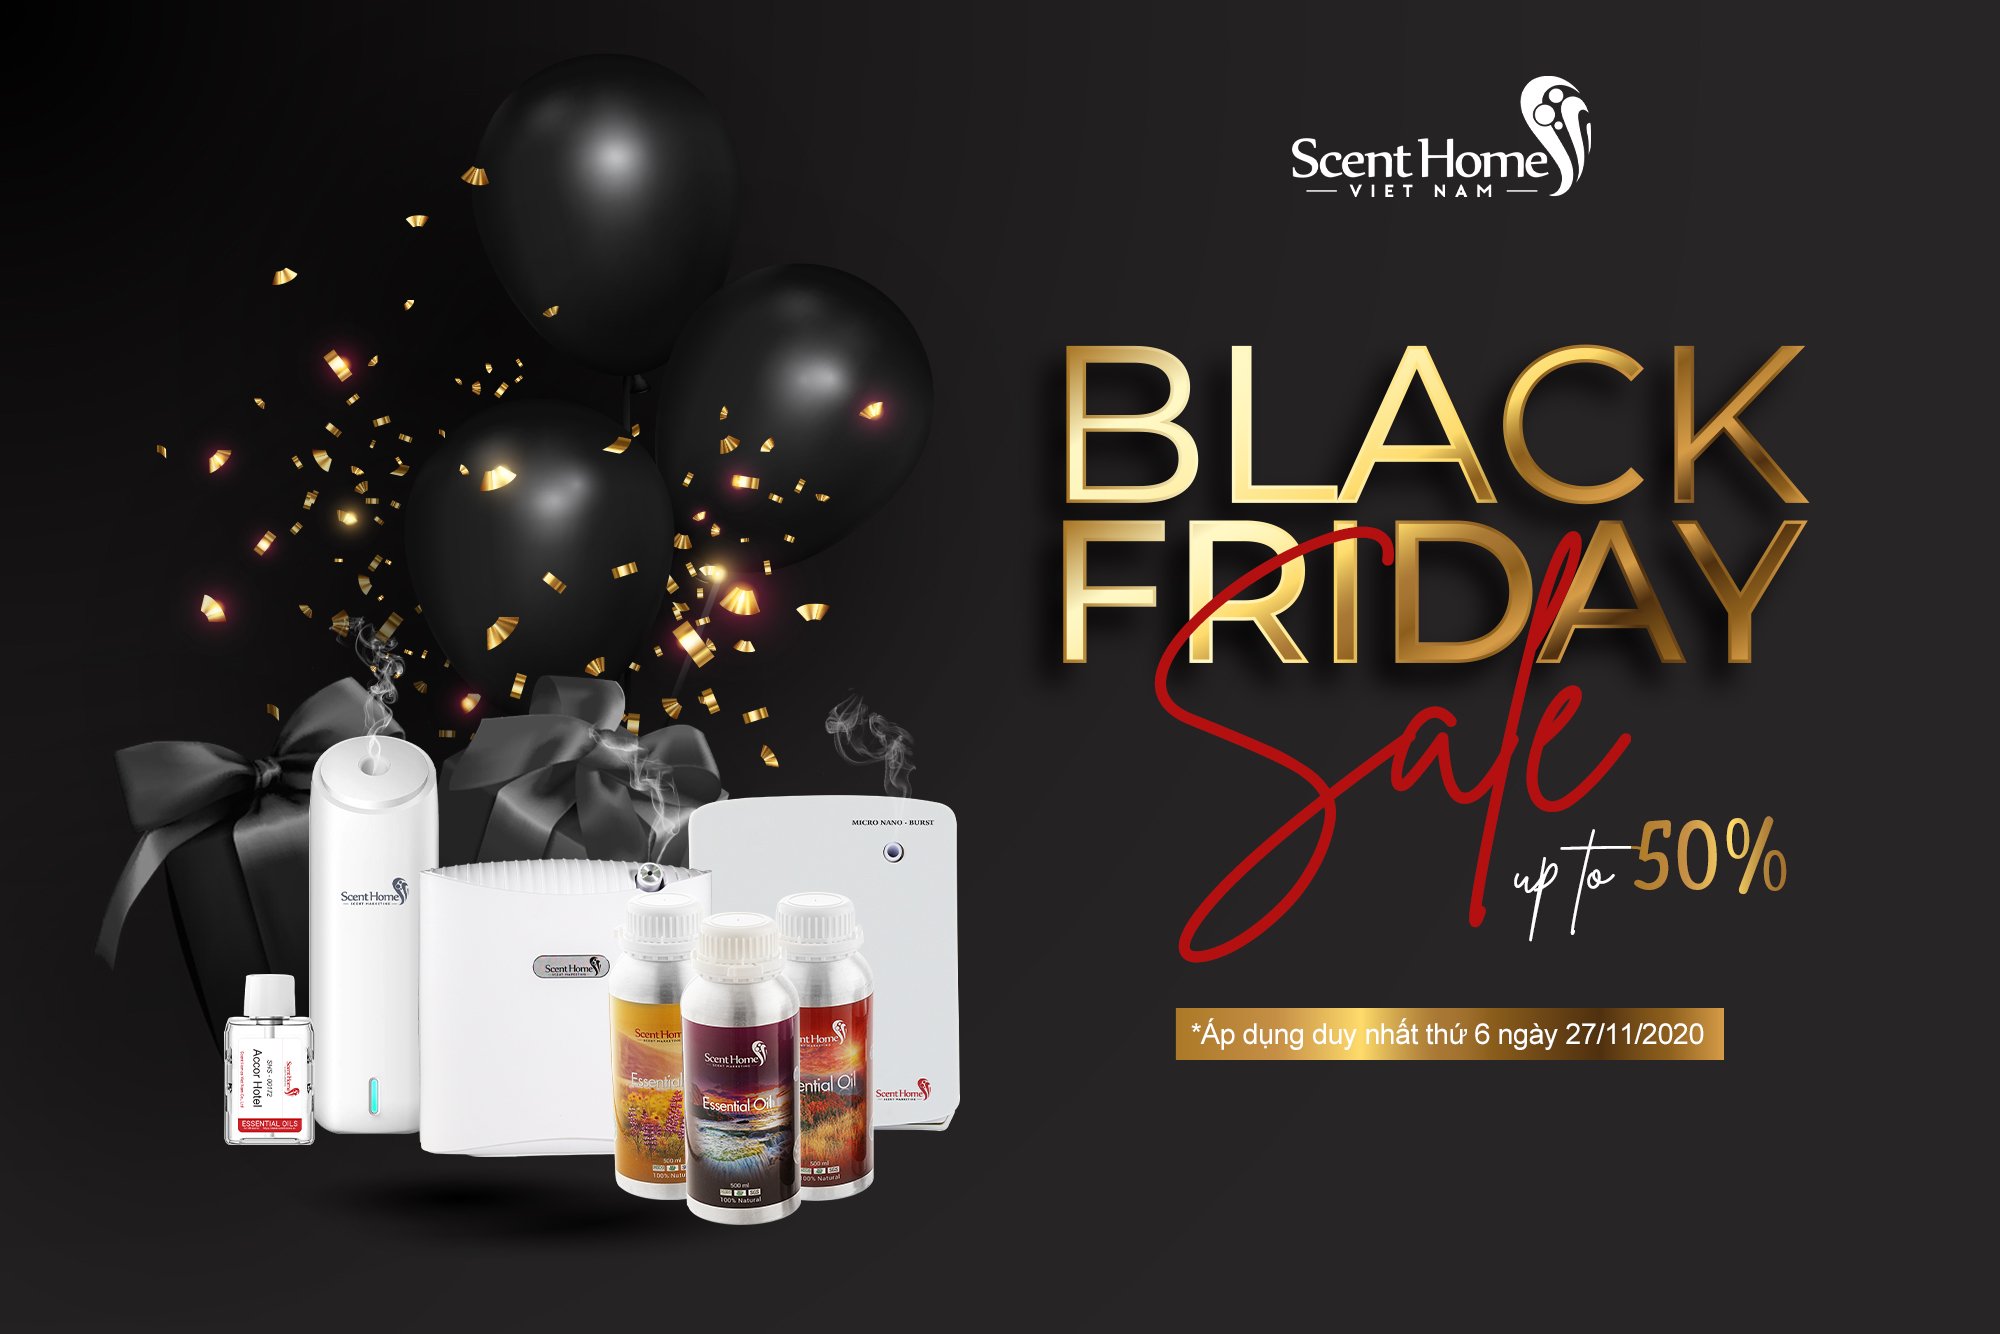 BLACK FRIDAY SALE UP TO 50% - SCENT HOMES VIỆT NAM